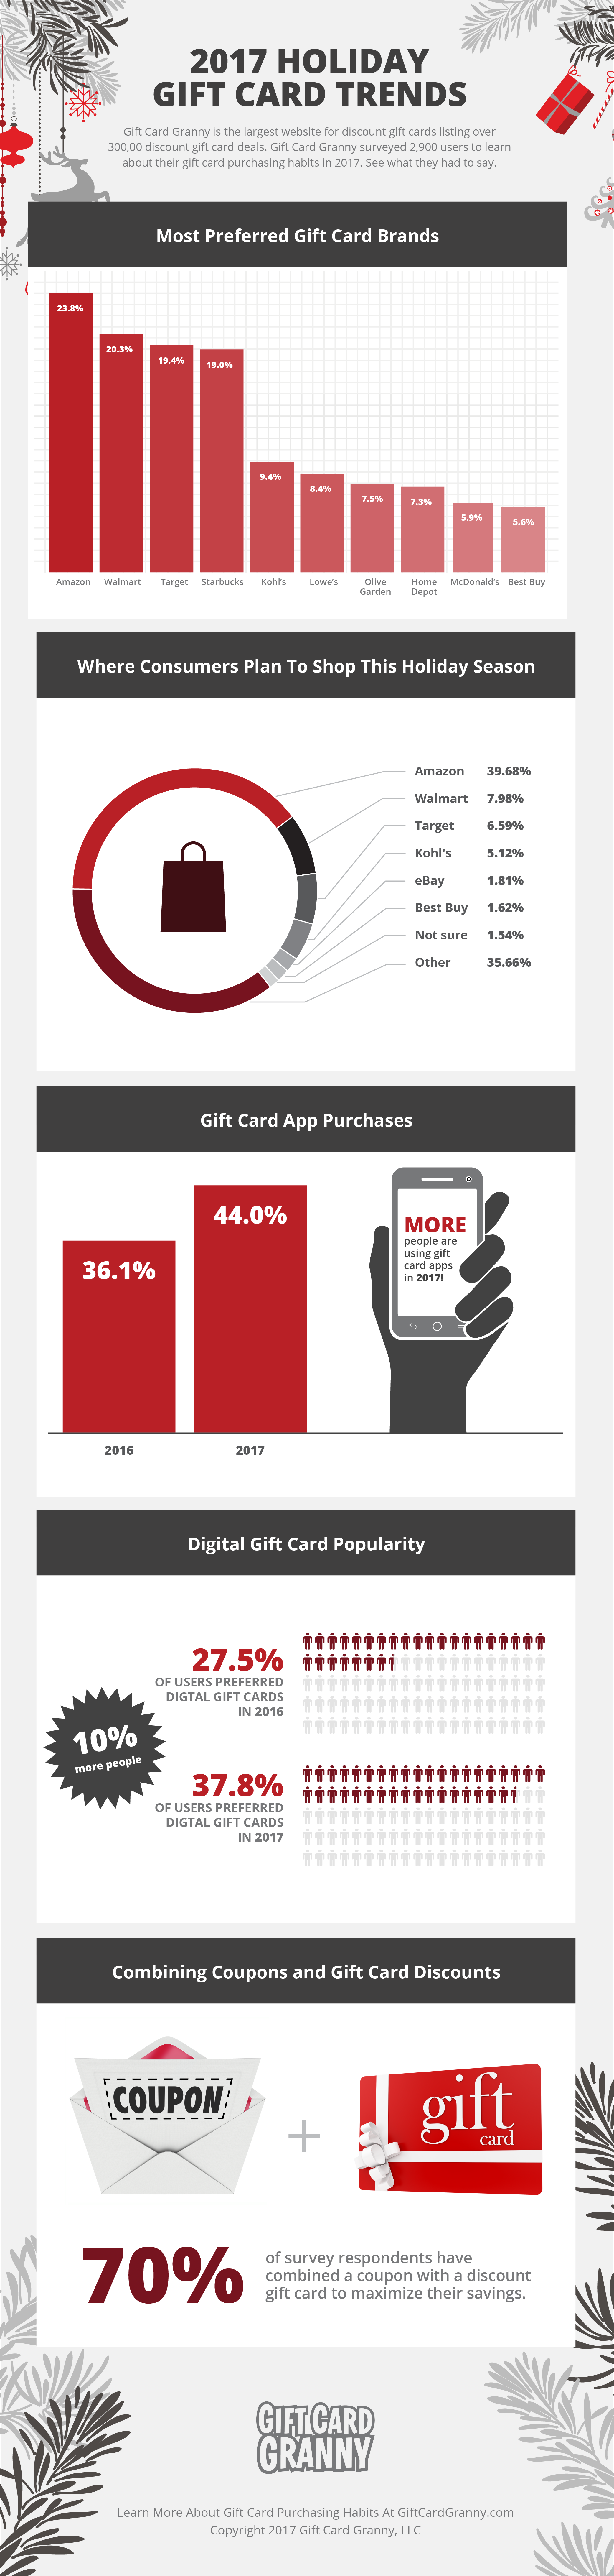 2017 Holiday Gift Card Trends Infographic